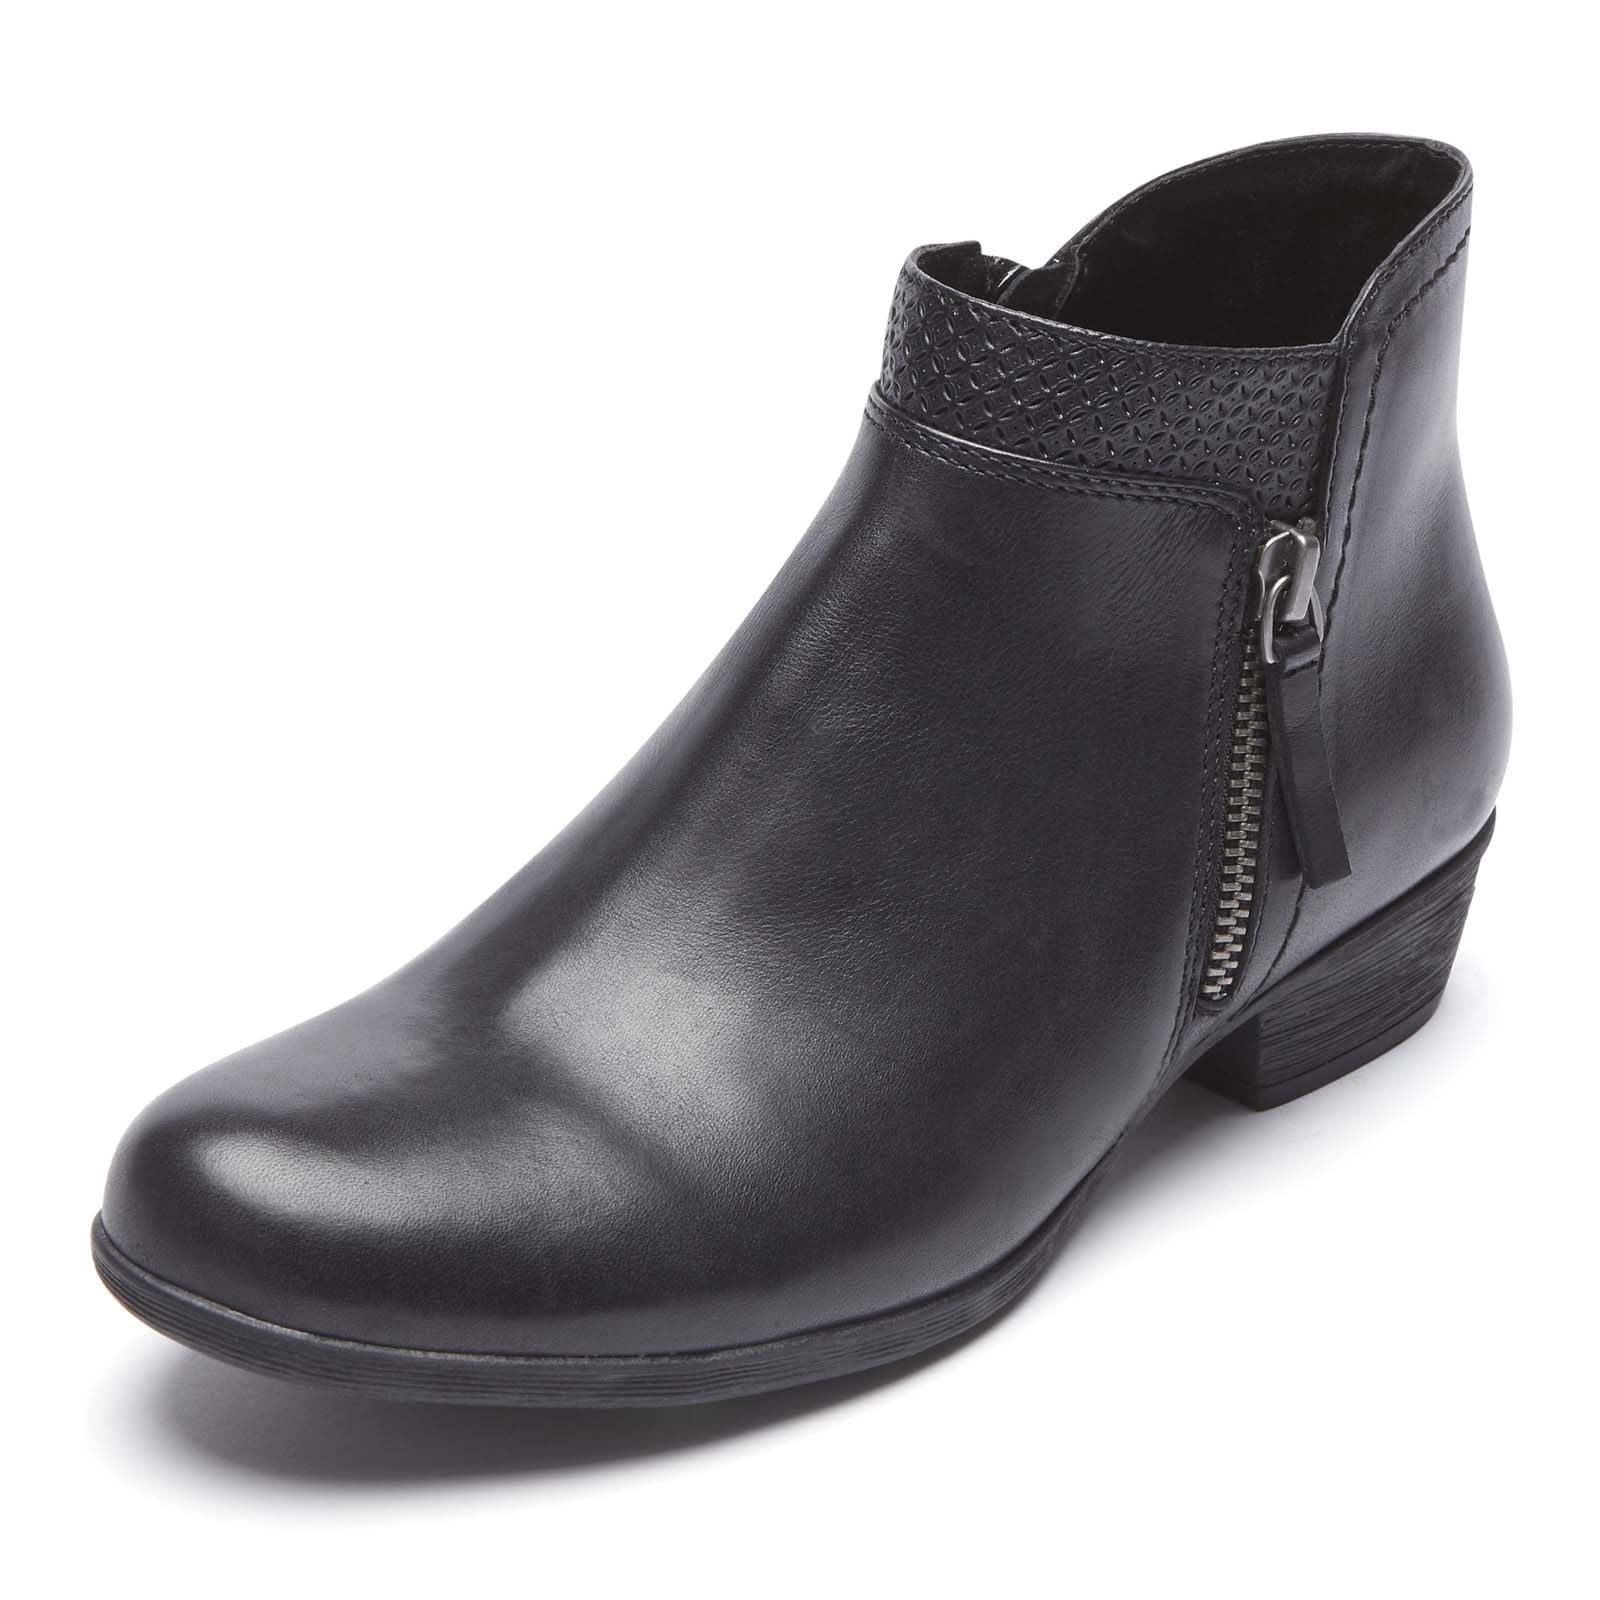 Rockport Women's Carly Bootie Ankle Boot